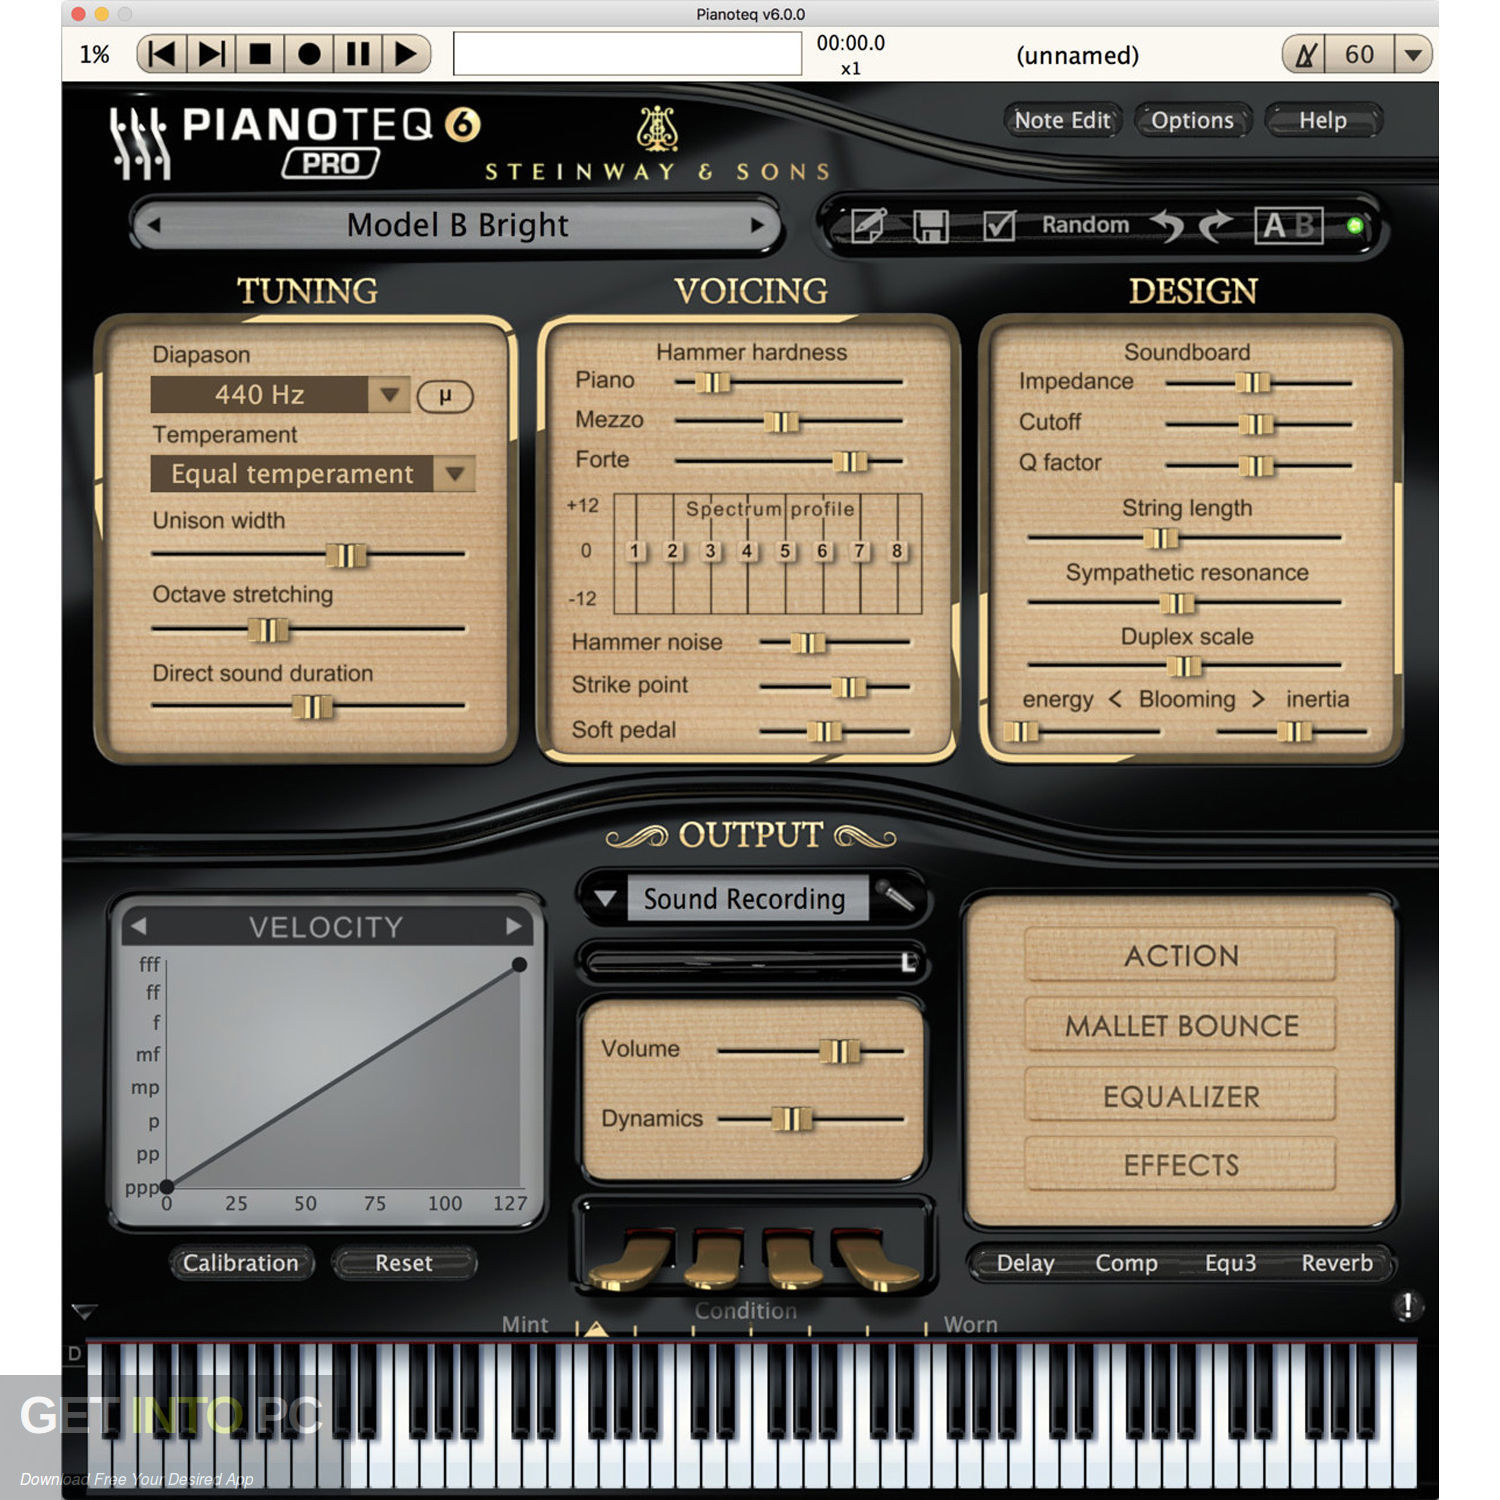 Pianoteq STAGE 6 VST Free Download - Full Version